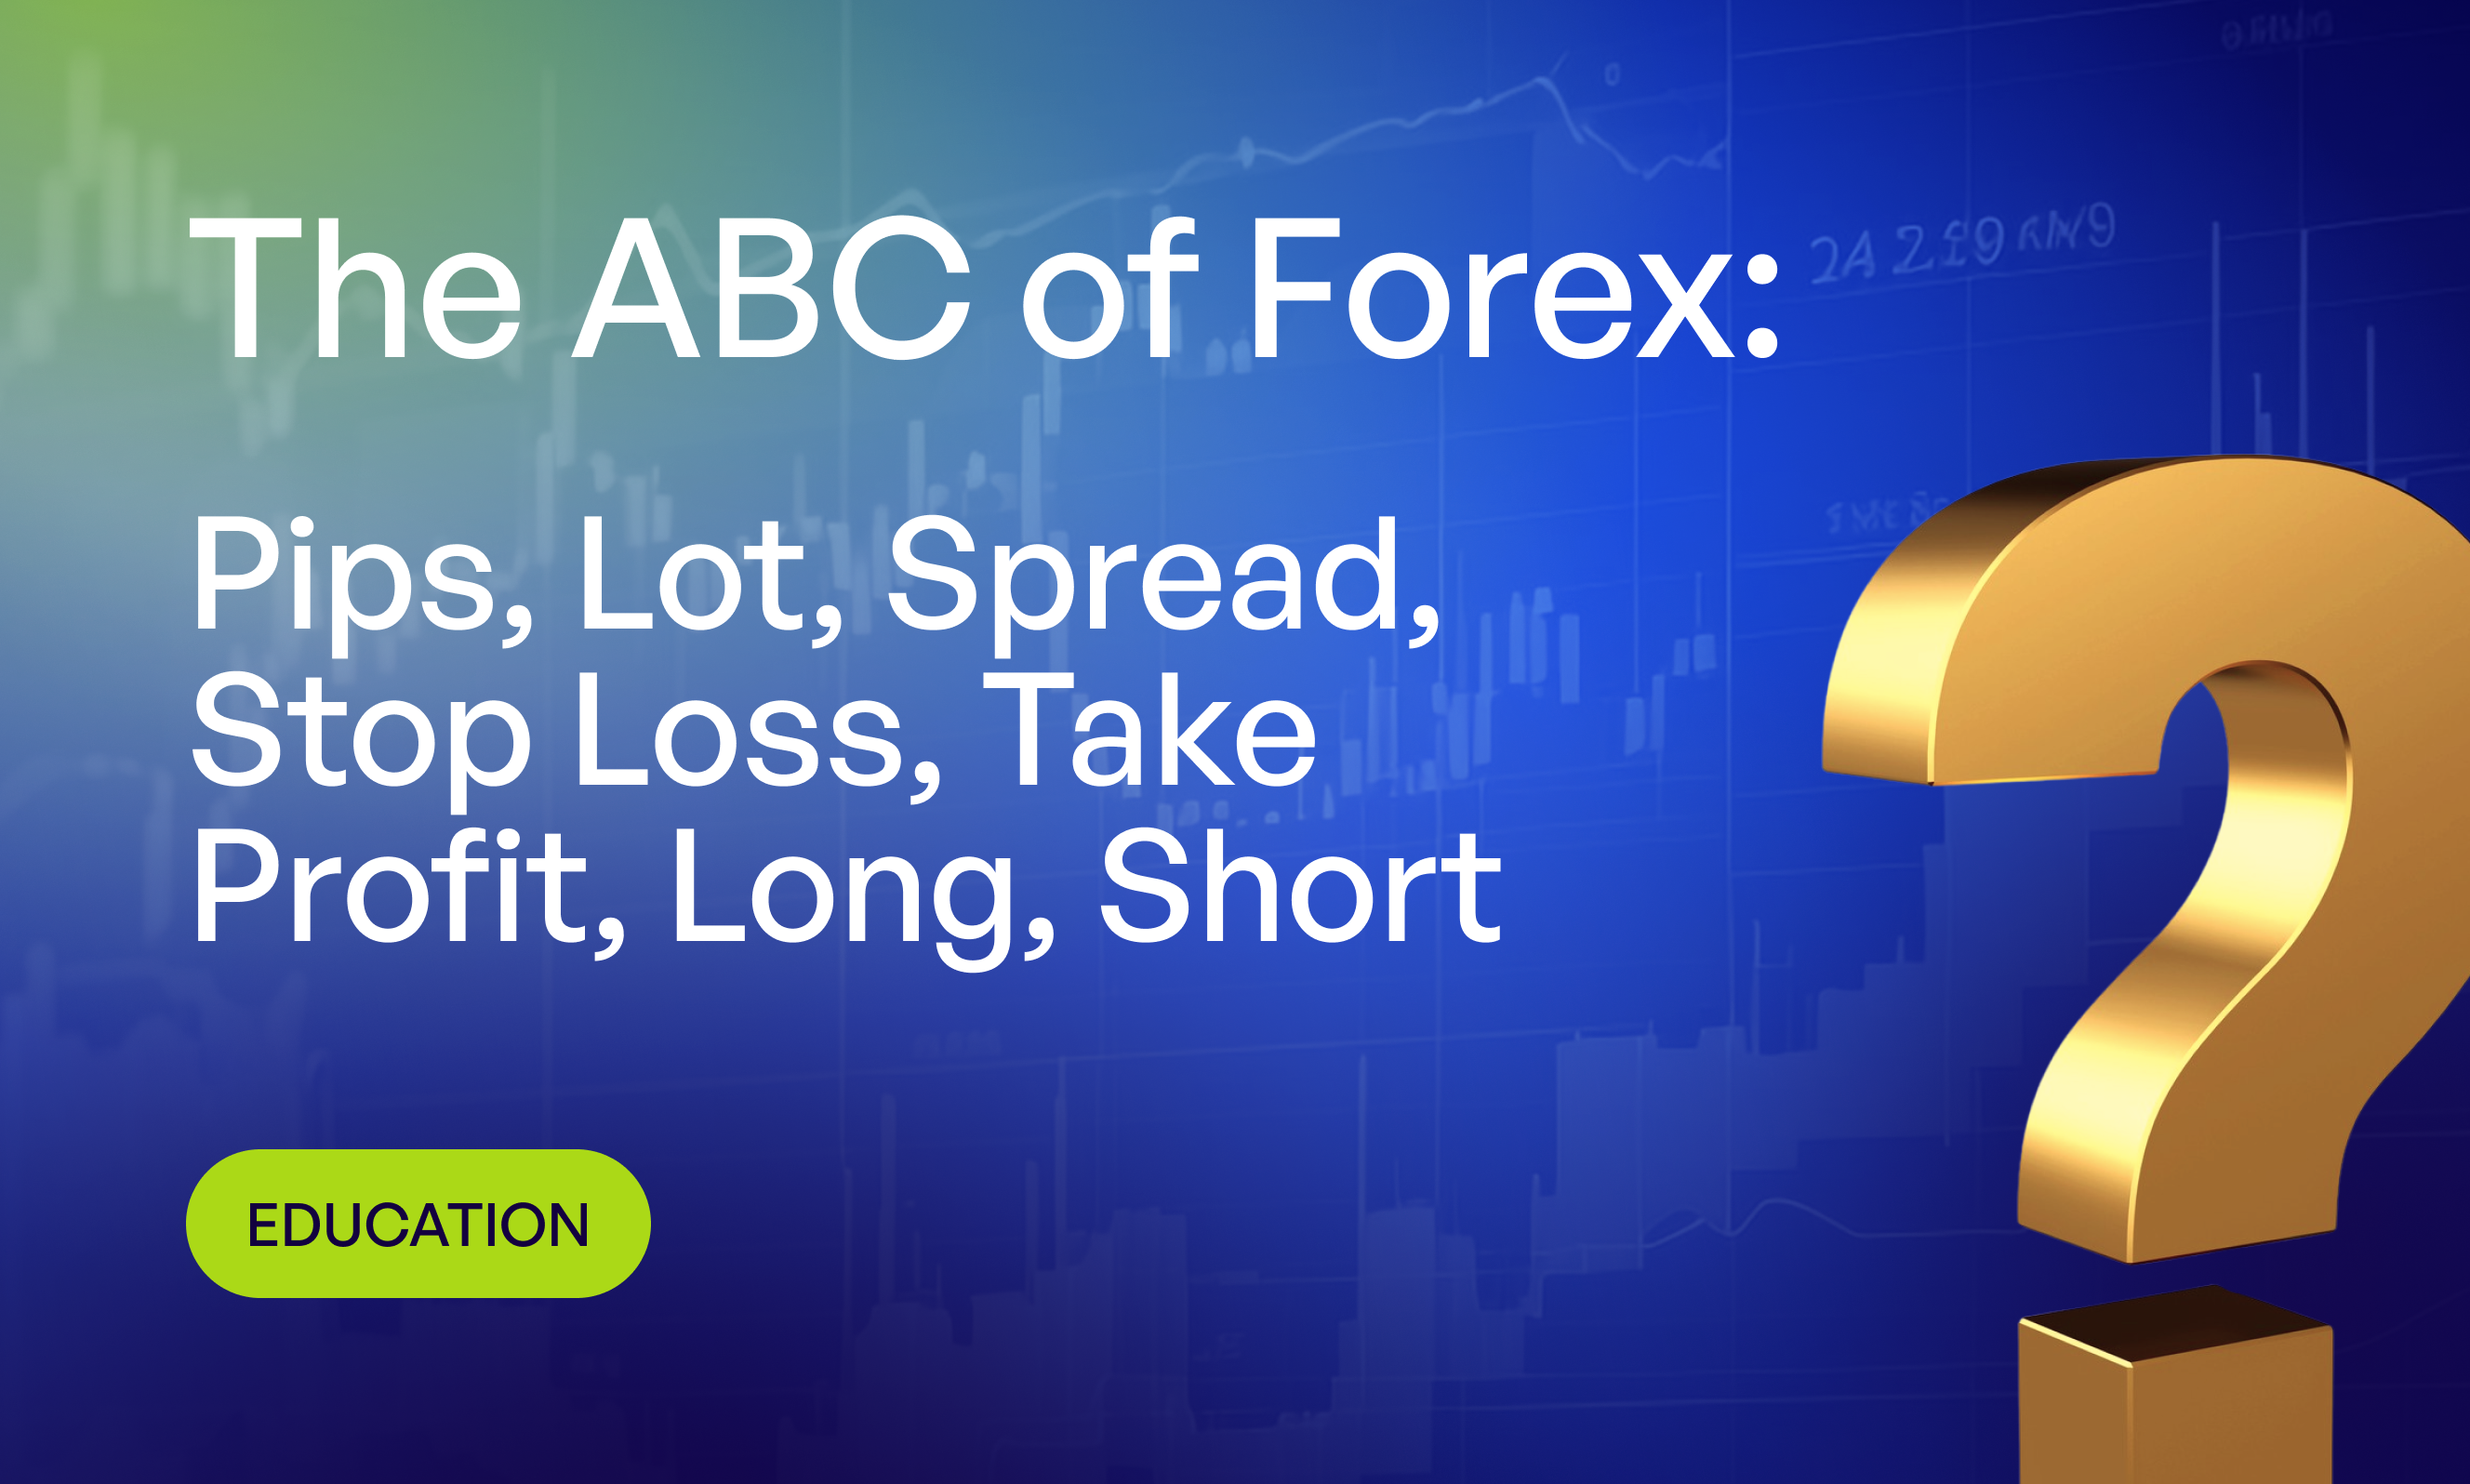 The ABC of Forex Trading: Pips, Lot, Spread, Stop Loss, Take Profit, Long, Short